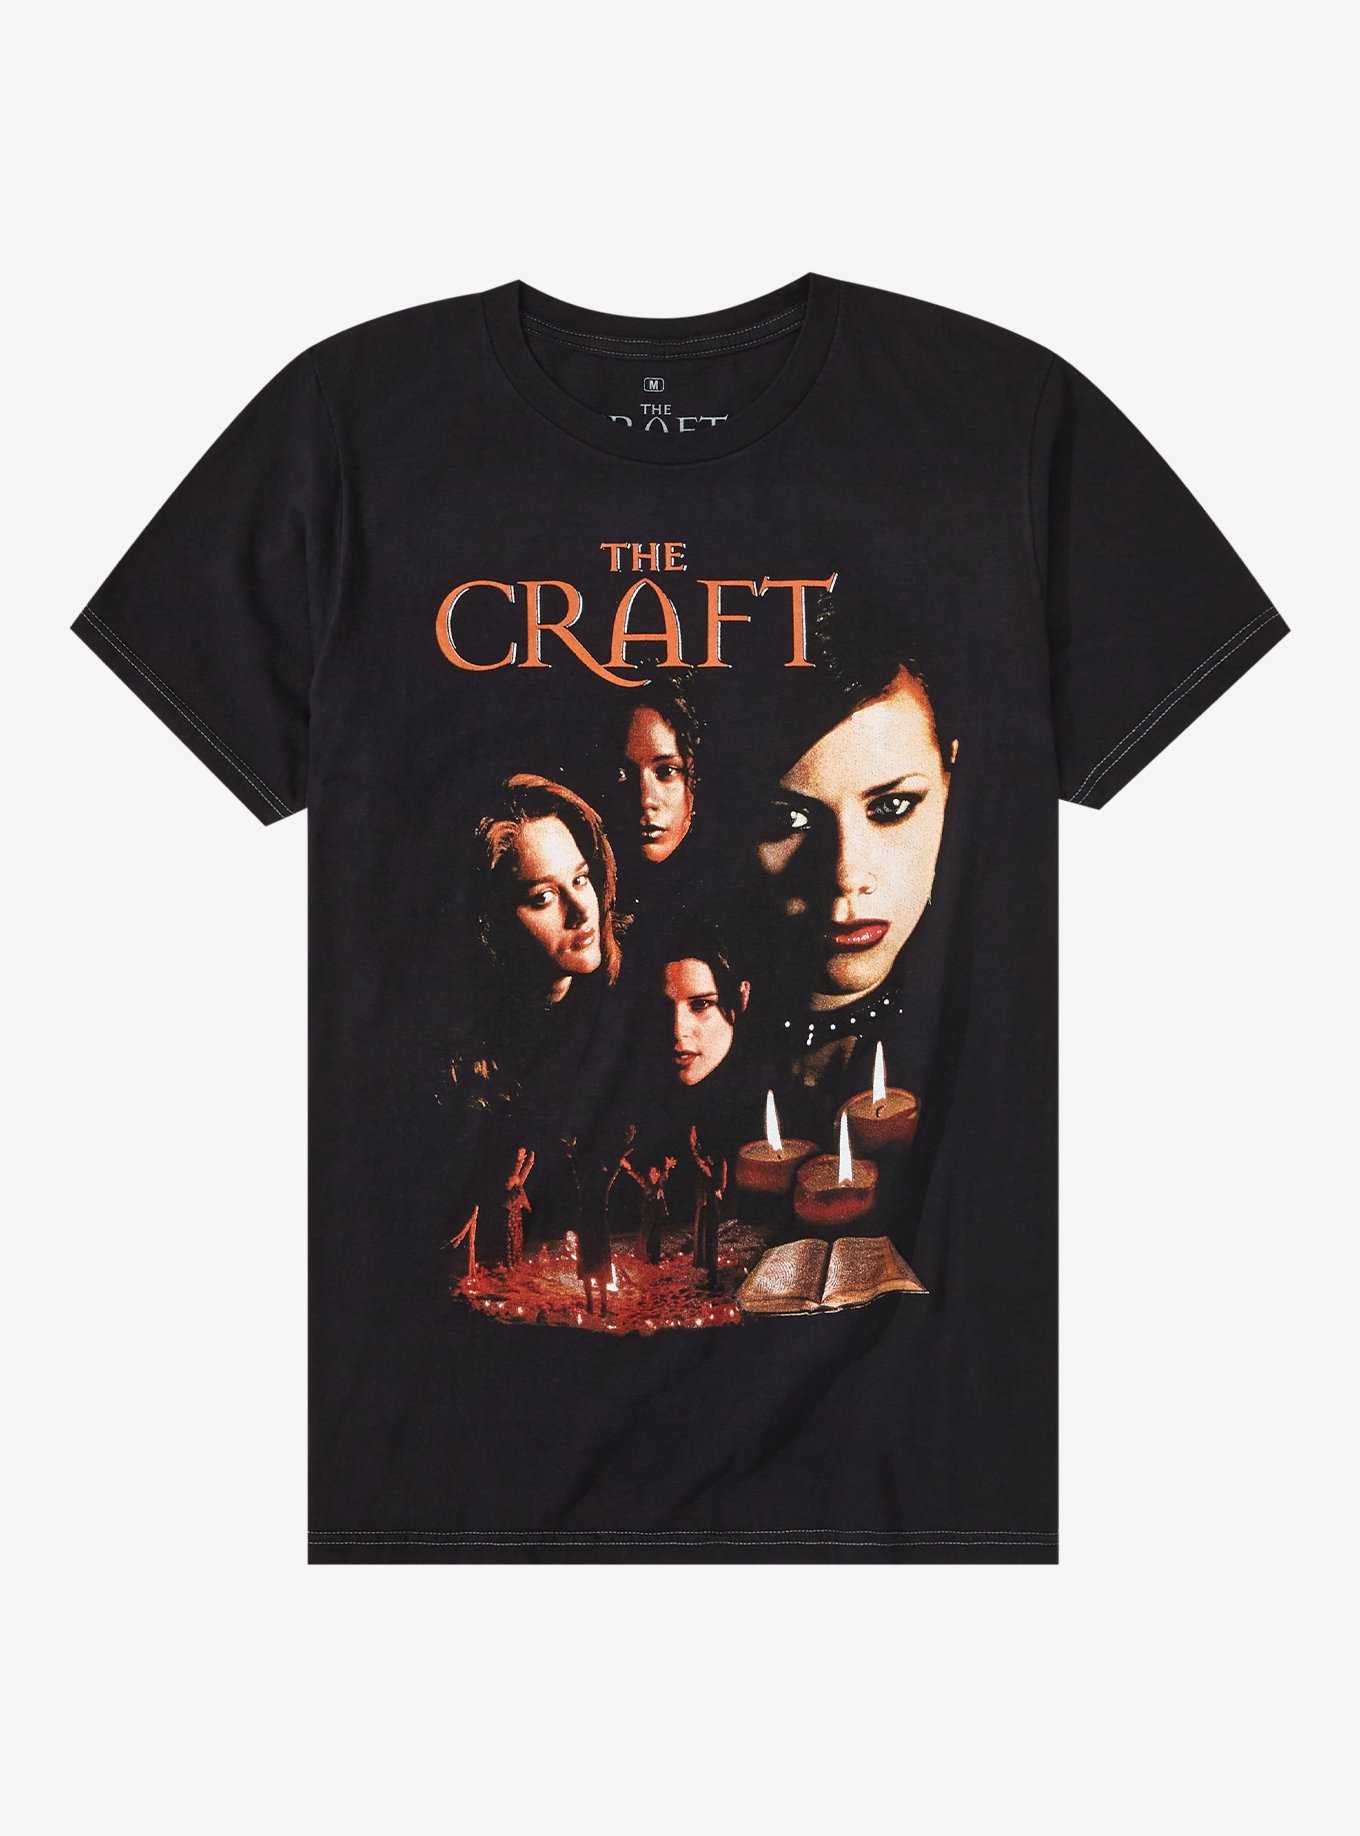 The Craft Characters Collage Boyfriend Fit Girls T-Shirt, , hi-res